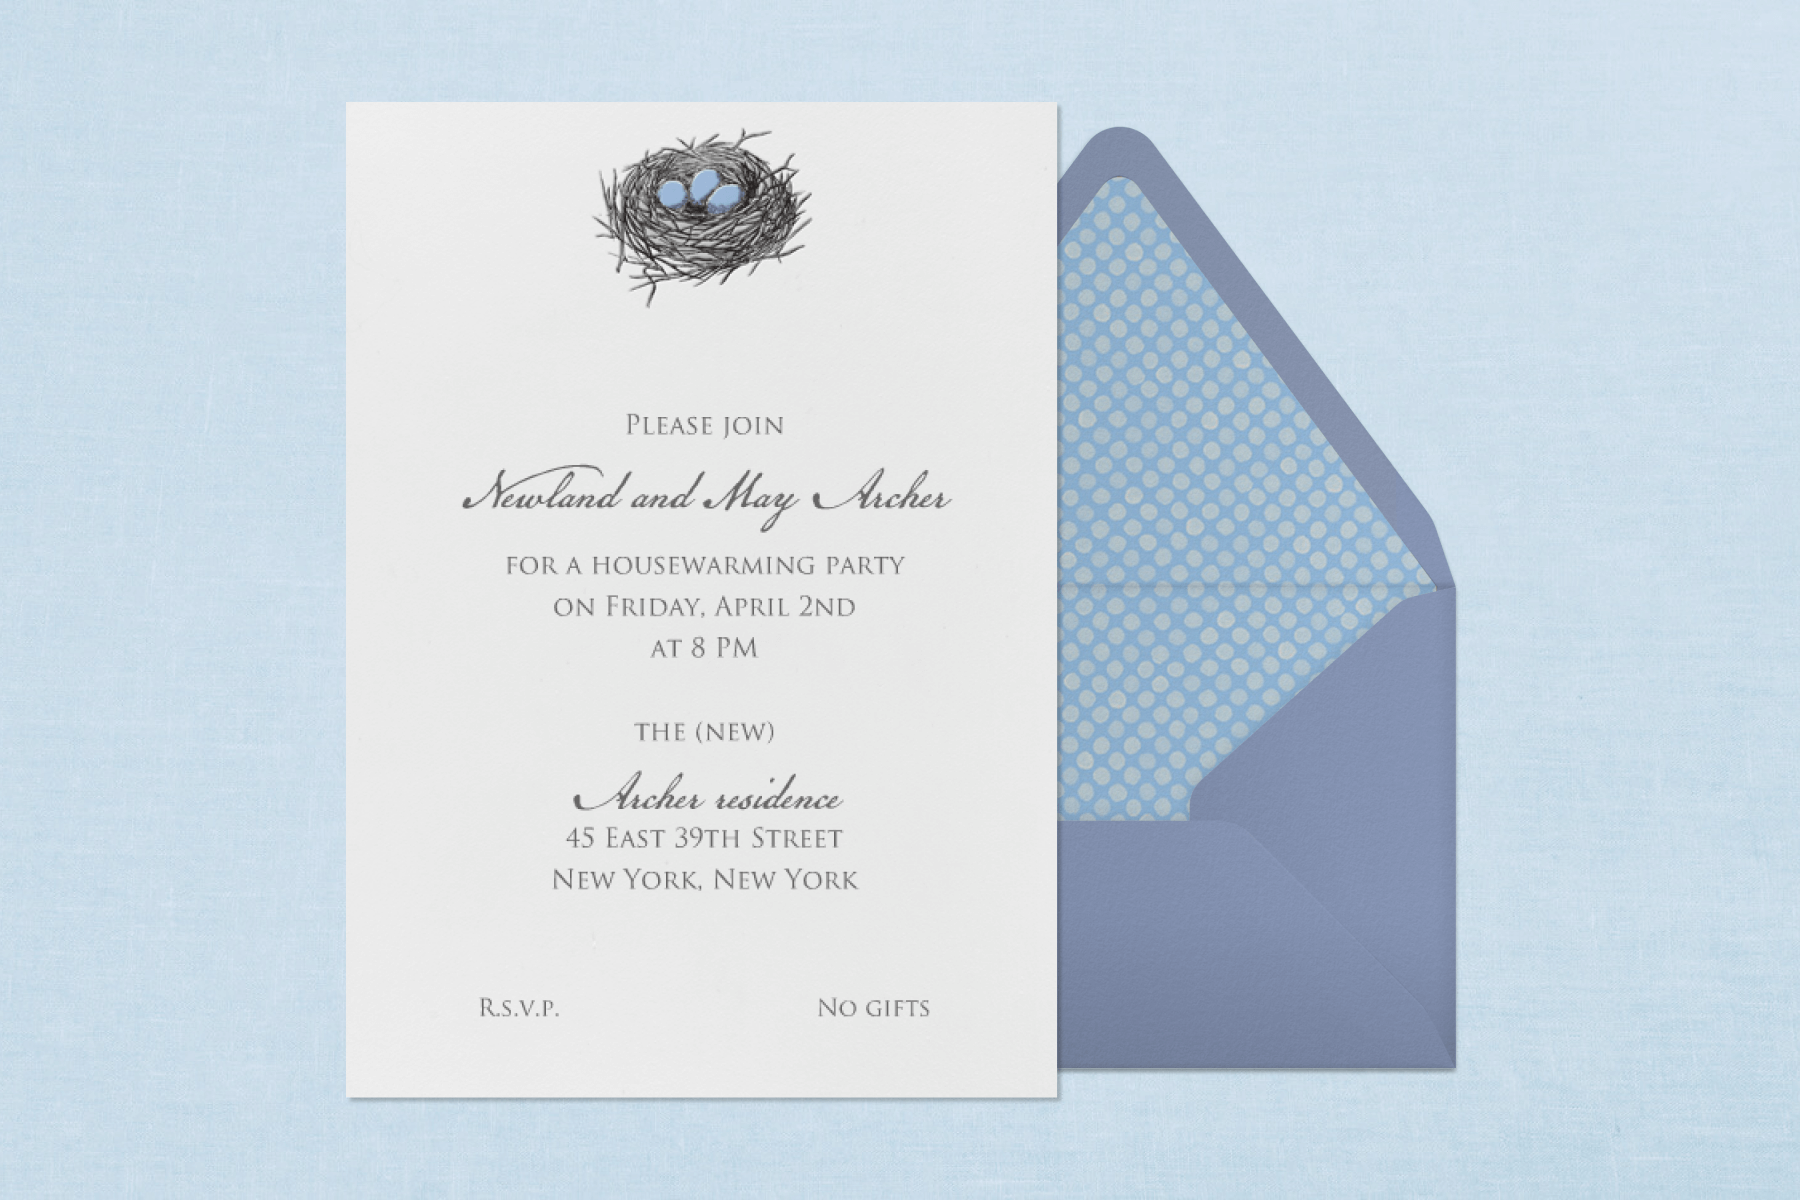 A housewarming party invitation on a light blue backdrop with a blue envelope and polka dot liner has a small illustration of a bird’s nest at the top with three blue eggs inside.